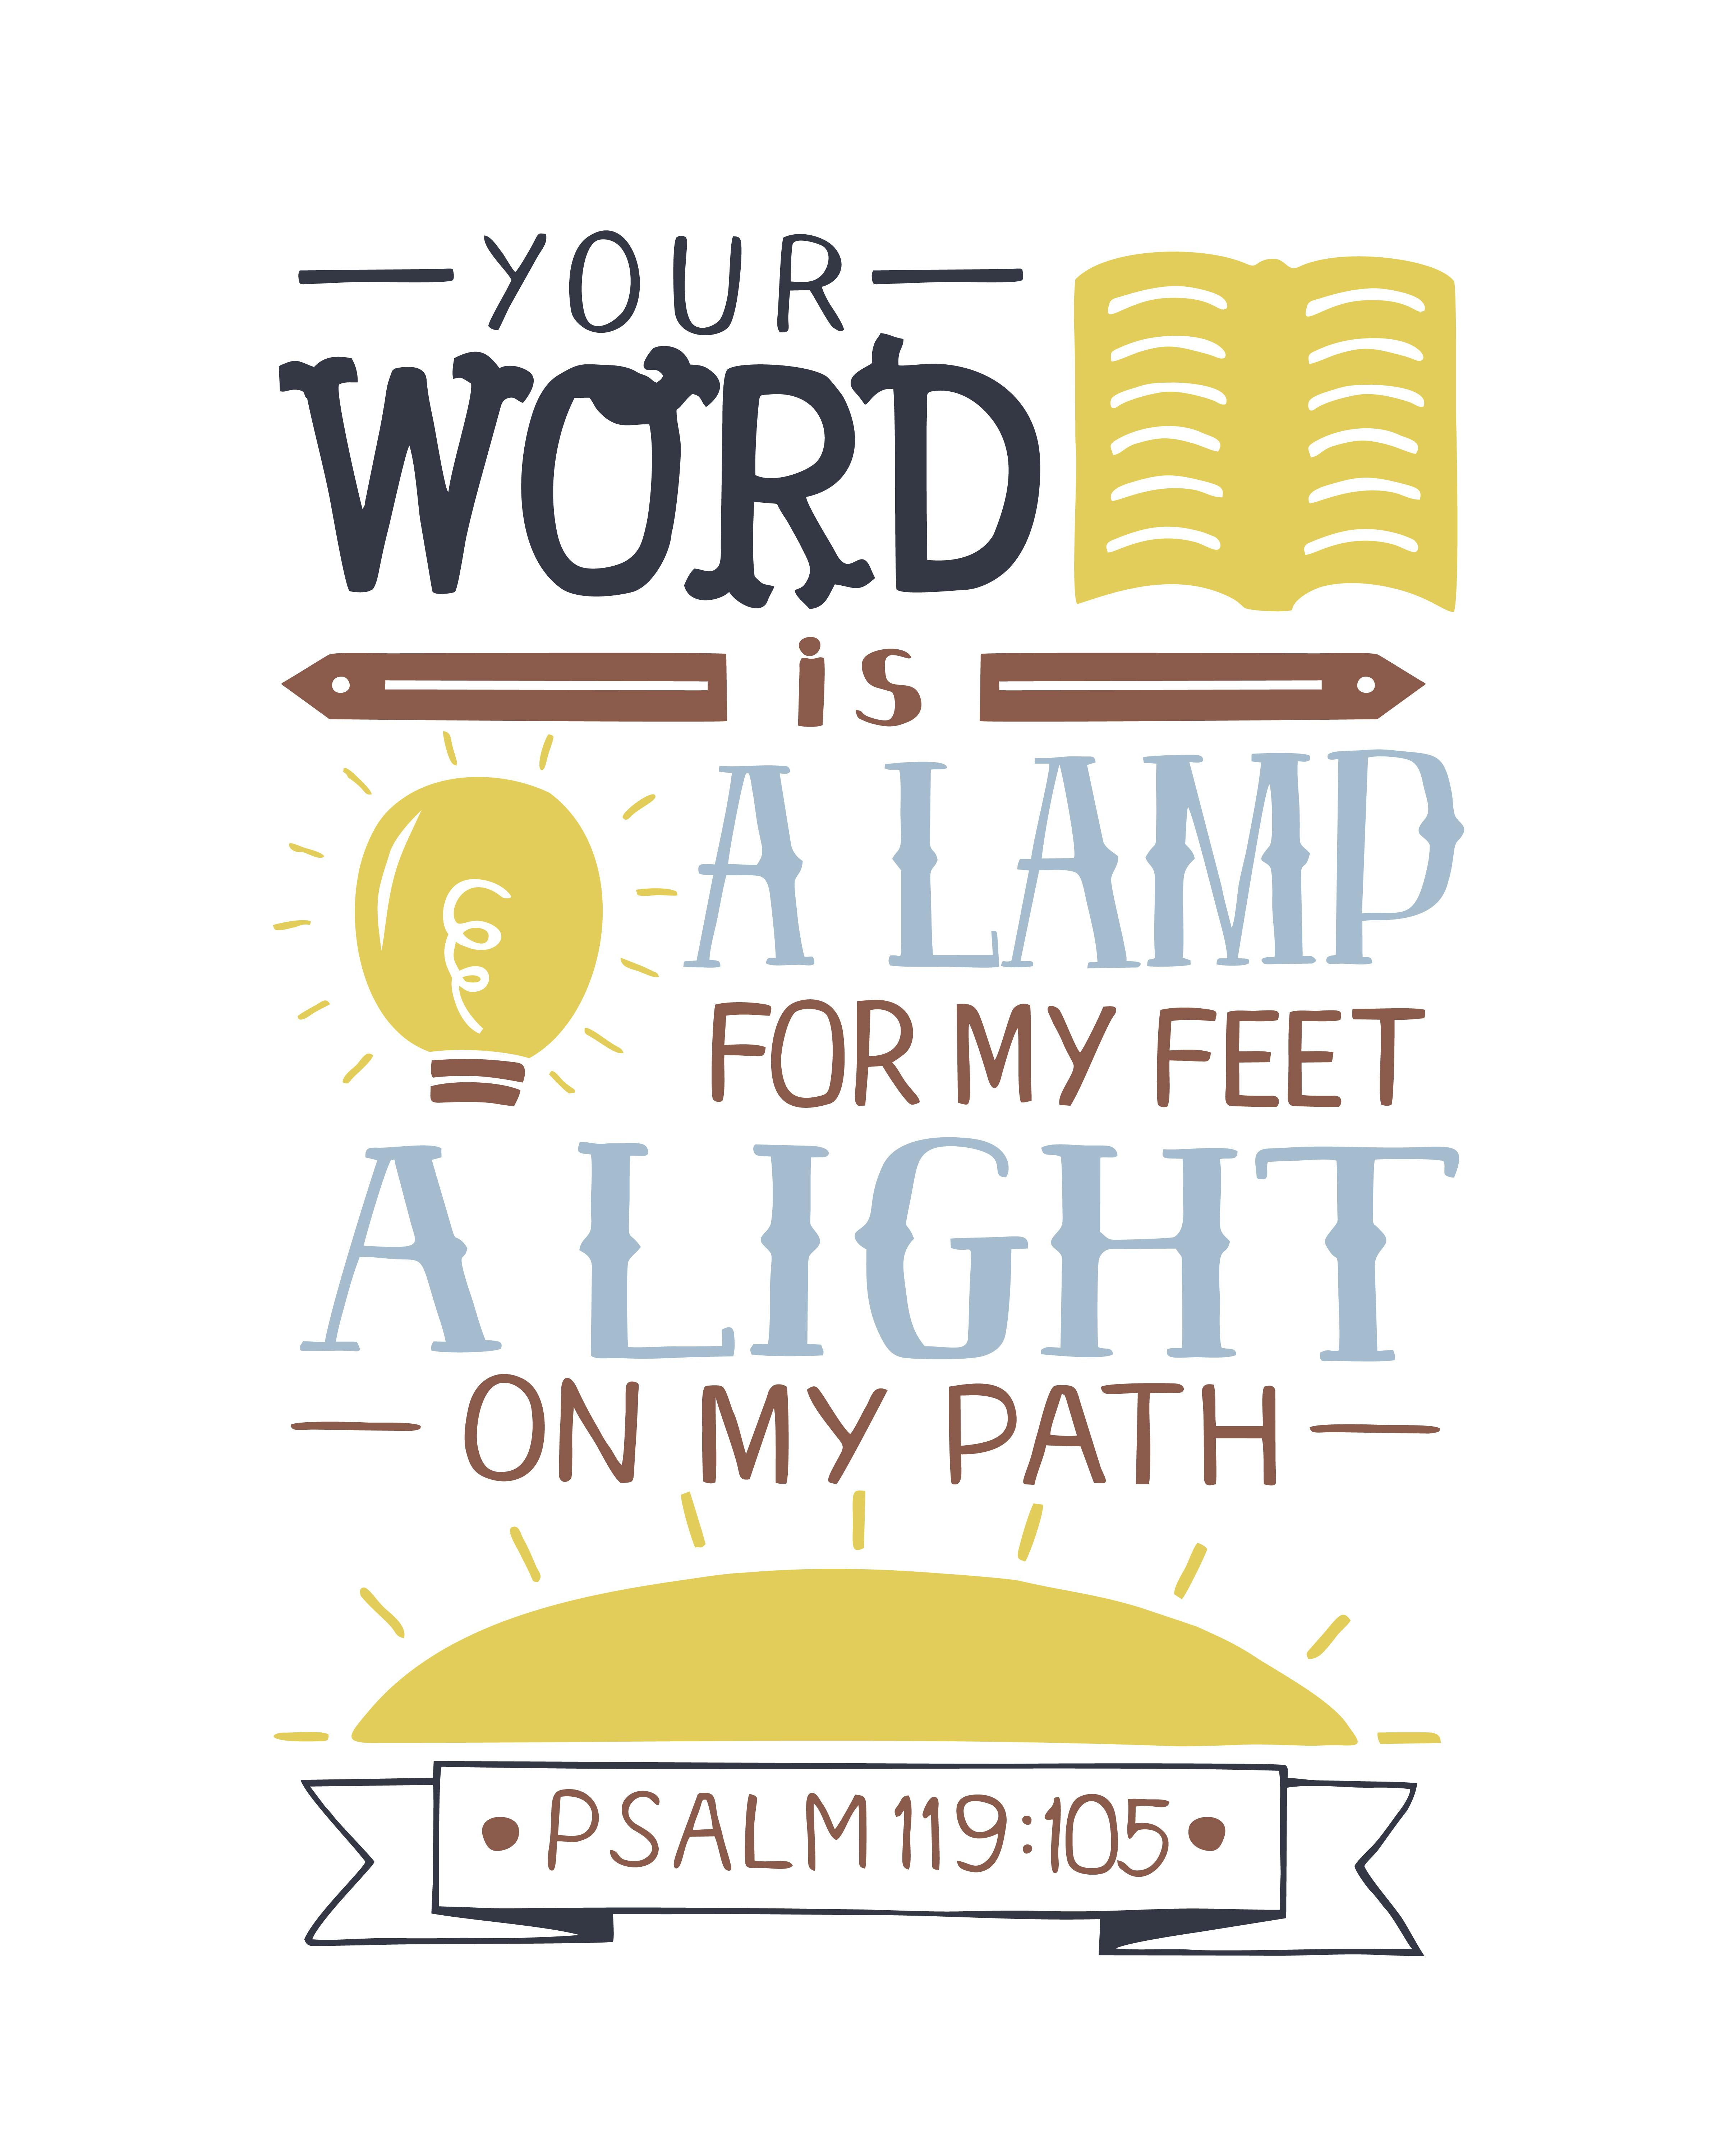 7 Scripture cards to help engage your kiddo in the Word!